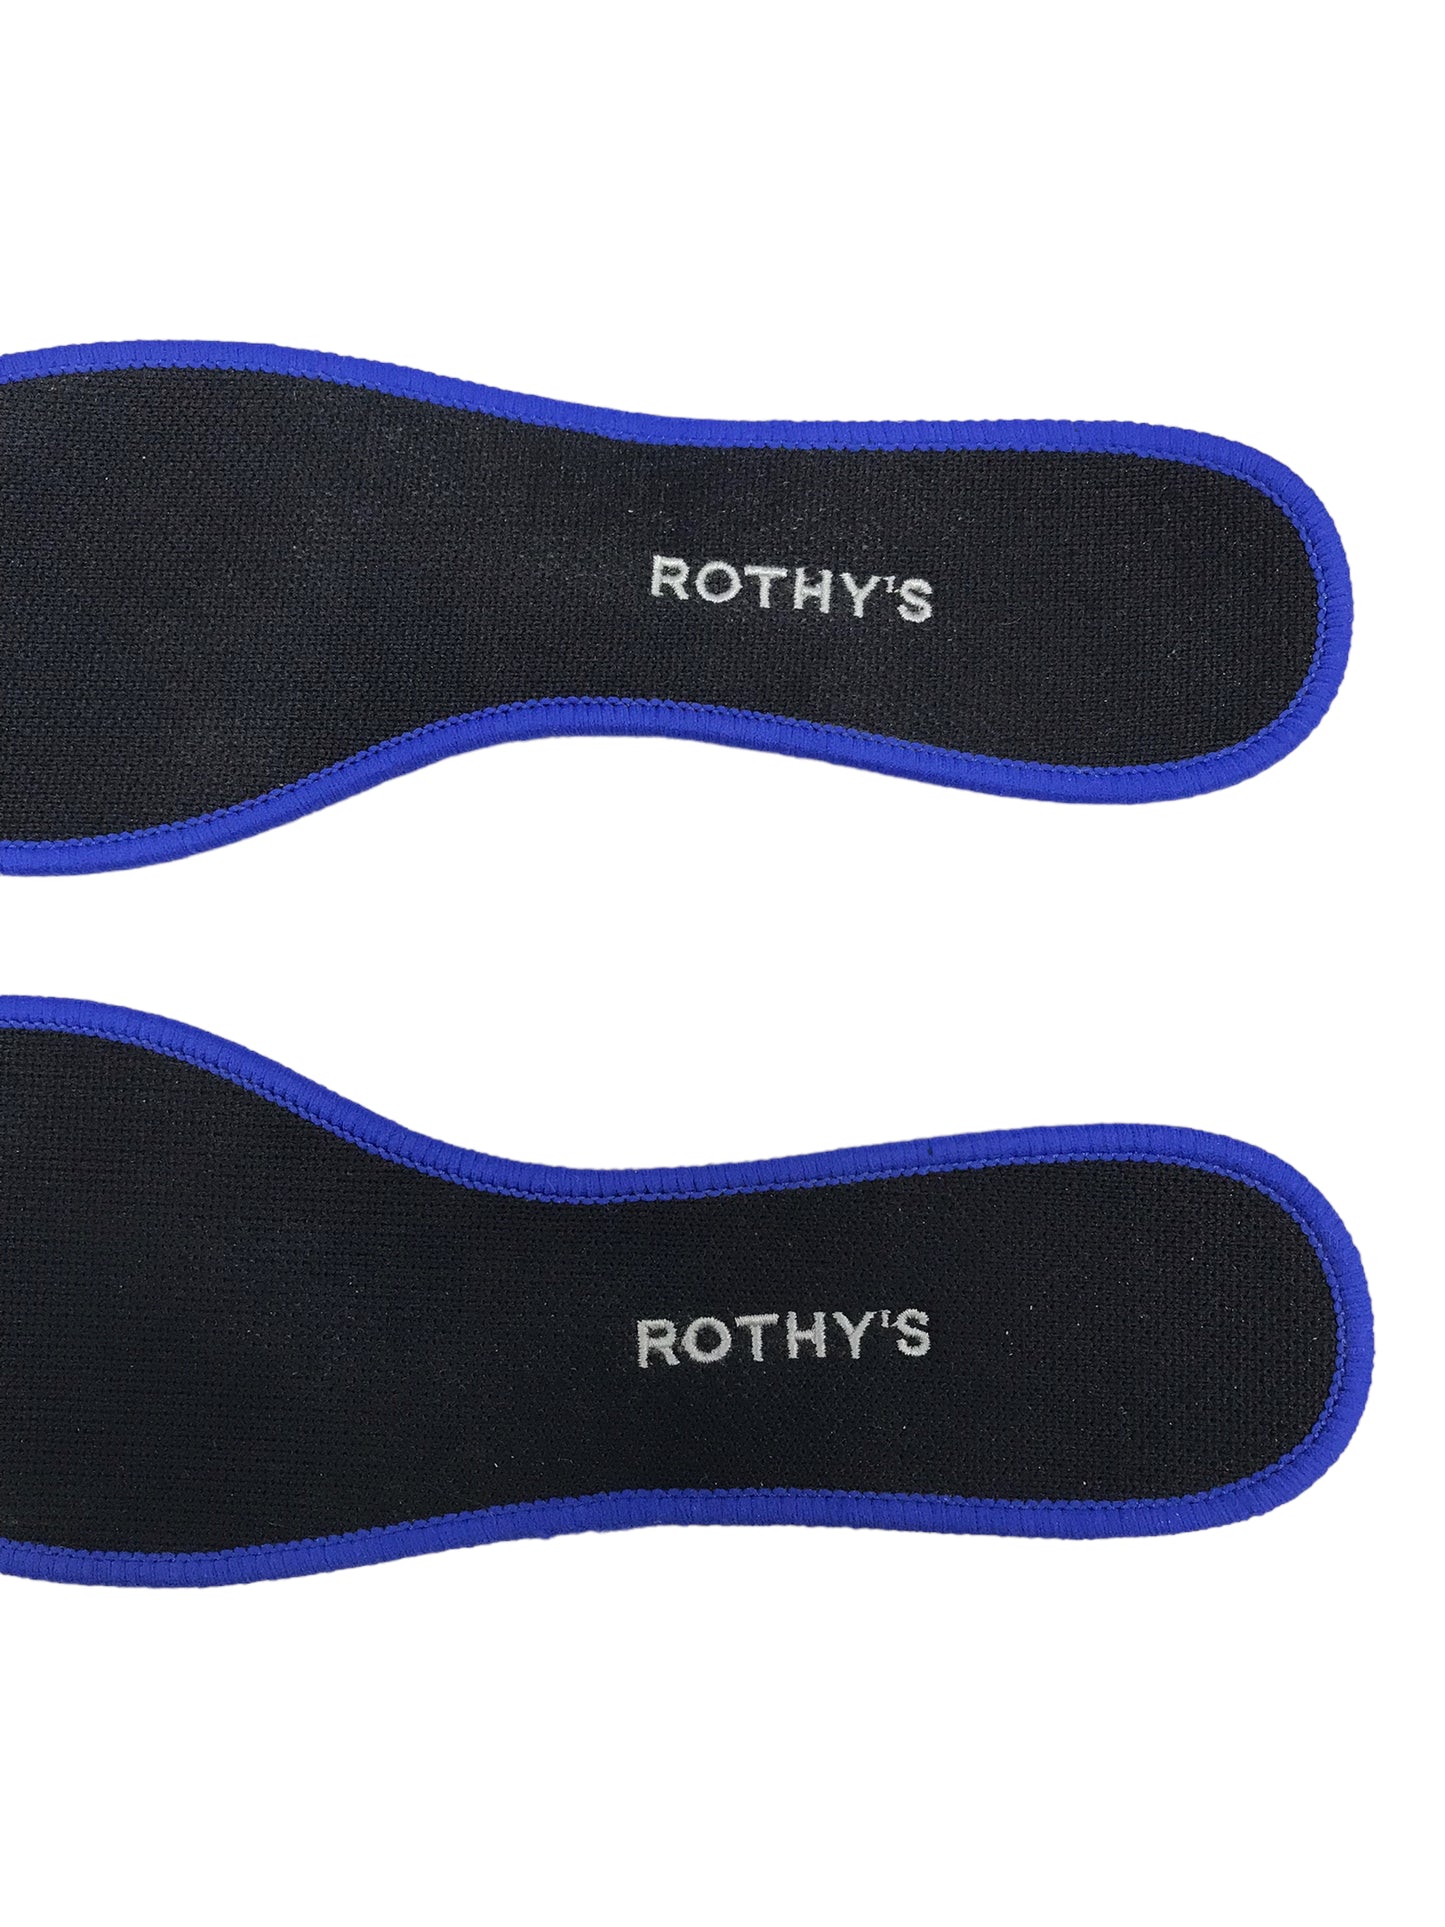 Shoes Flats Ballet By Rothys  Size: 13